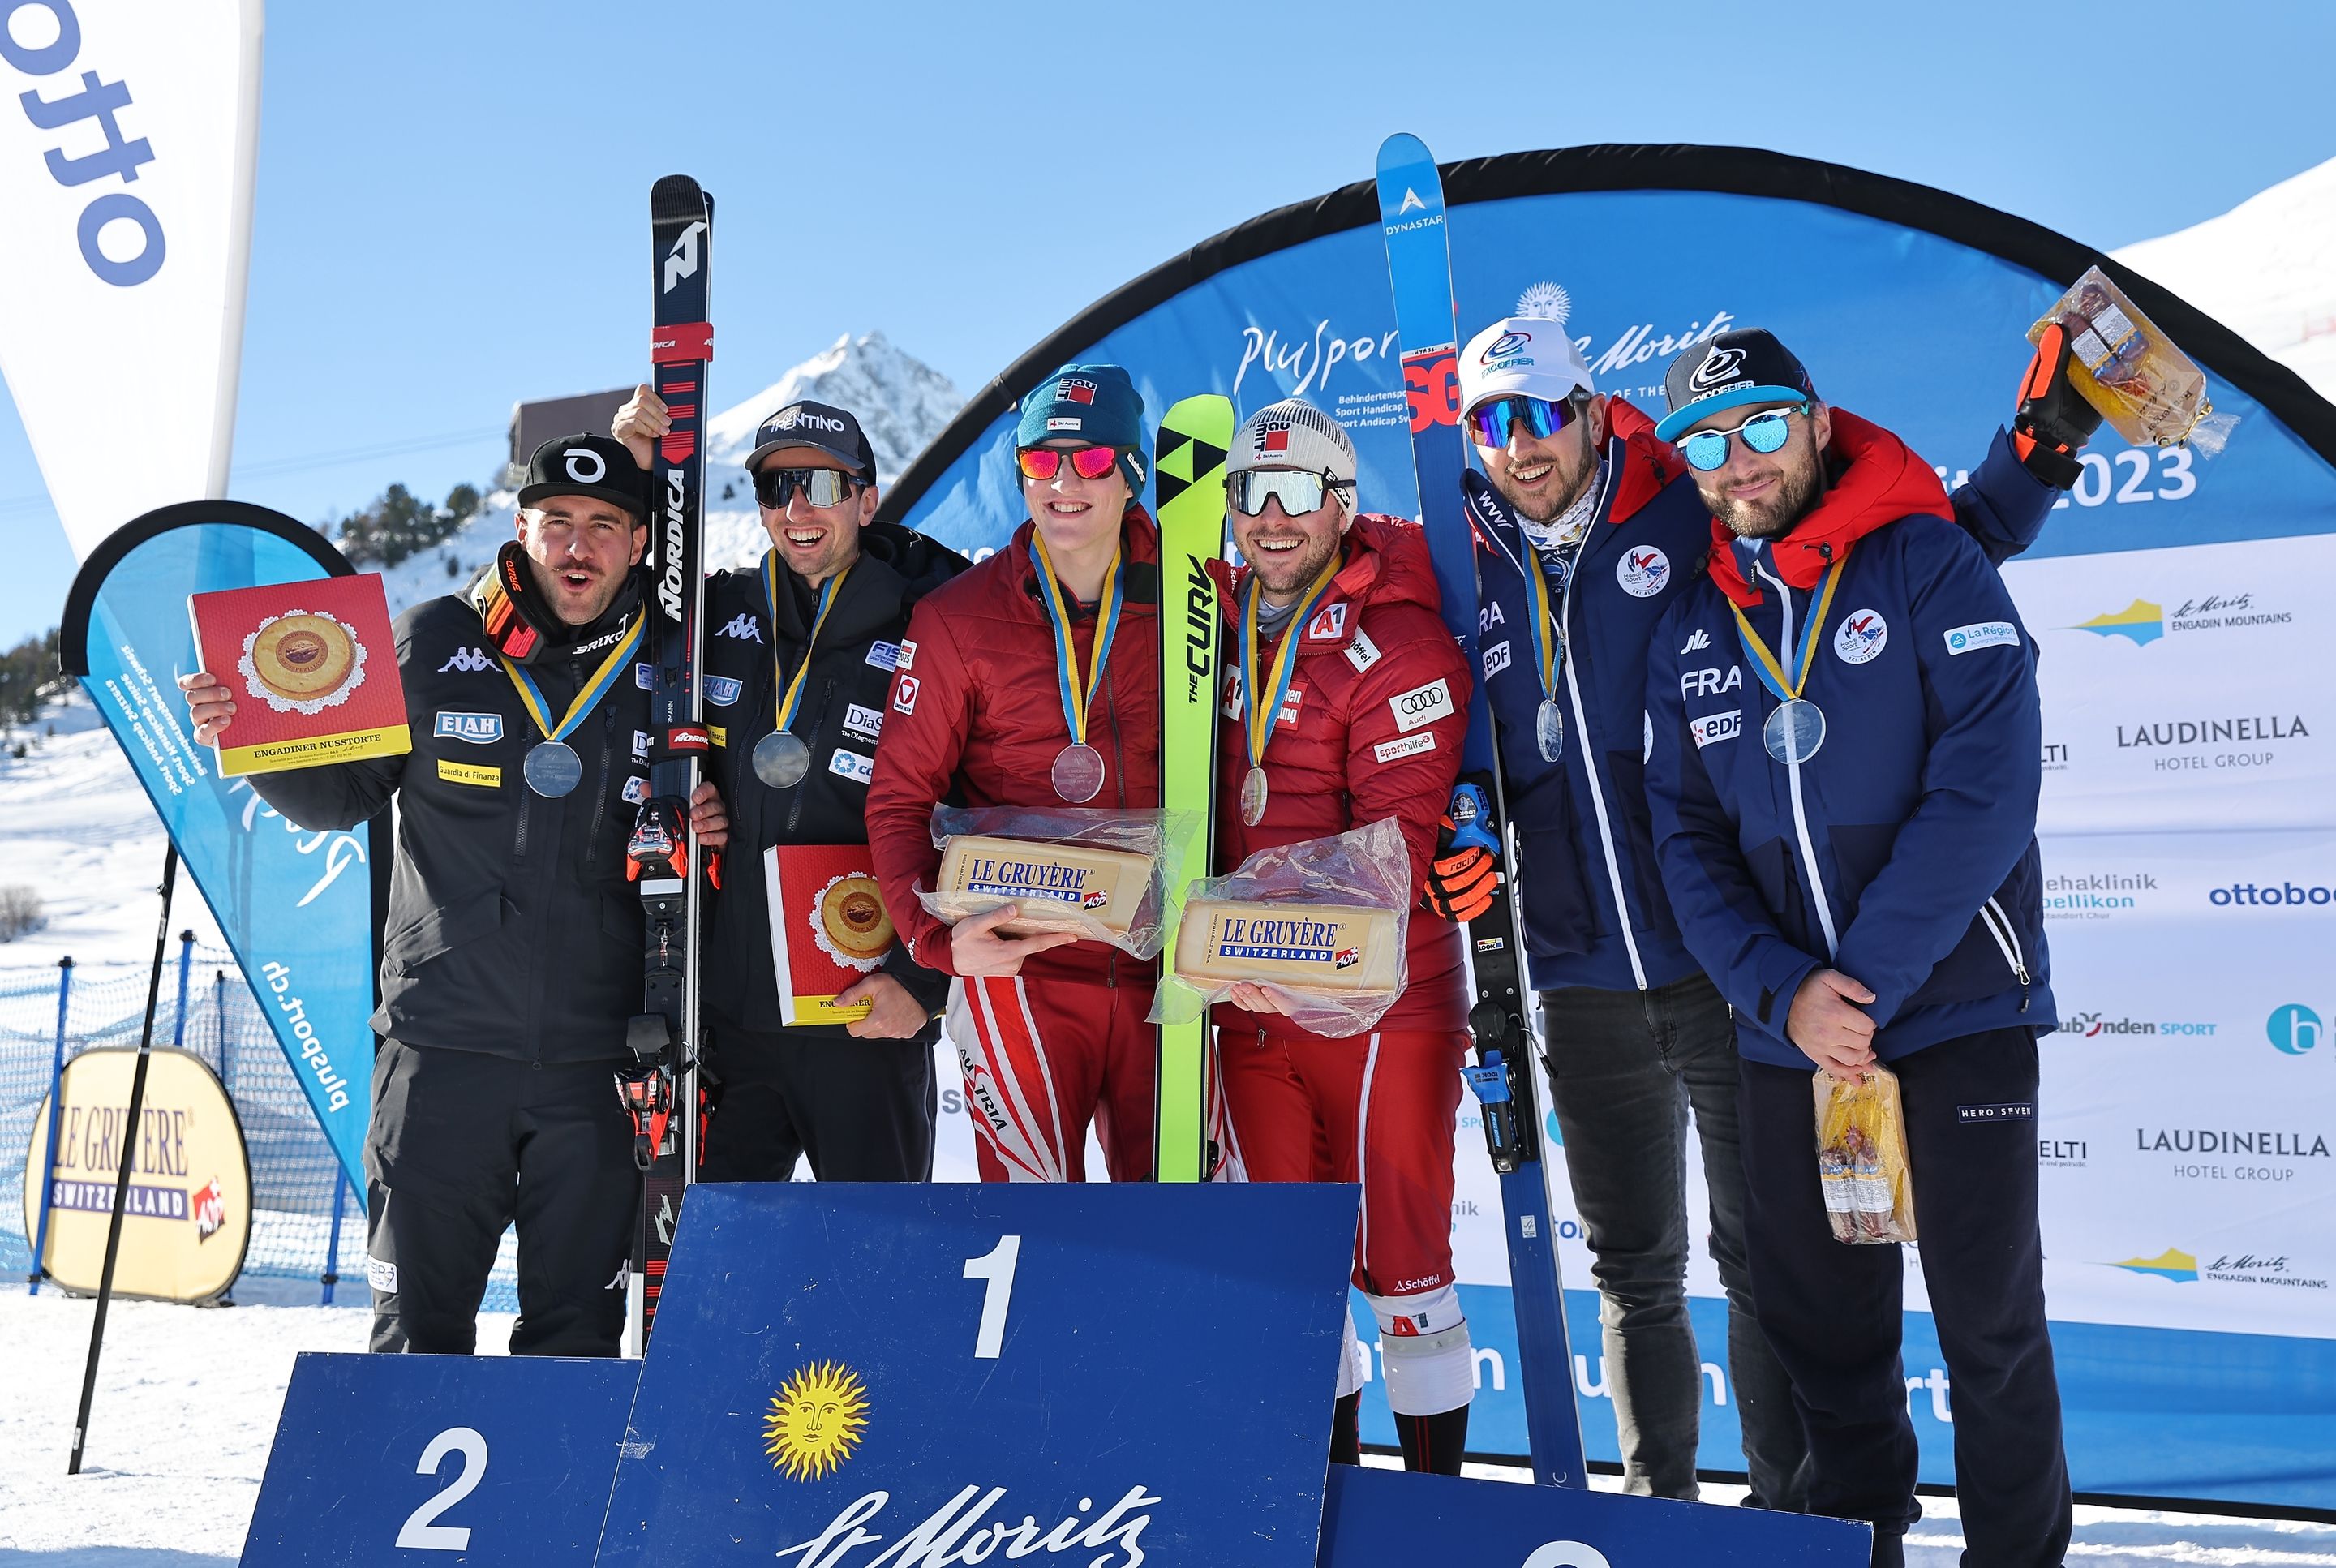 Podium day 2: (from left to right) Giacomo Bertagnolli and Andrea Ravelli, Johannes Aigner and Nico Haberl, Hyacinthe Deleplace and Roy Piccard